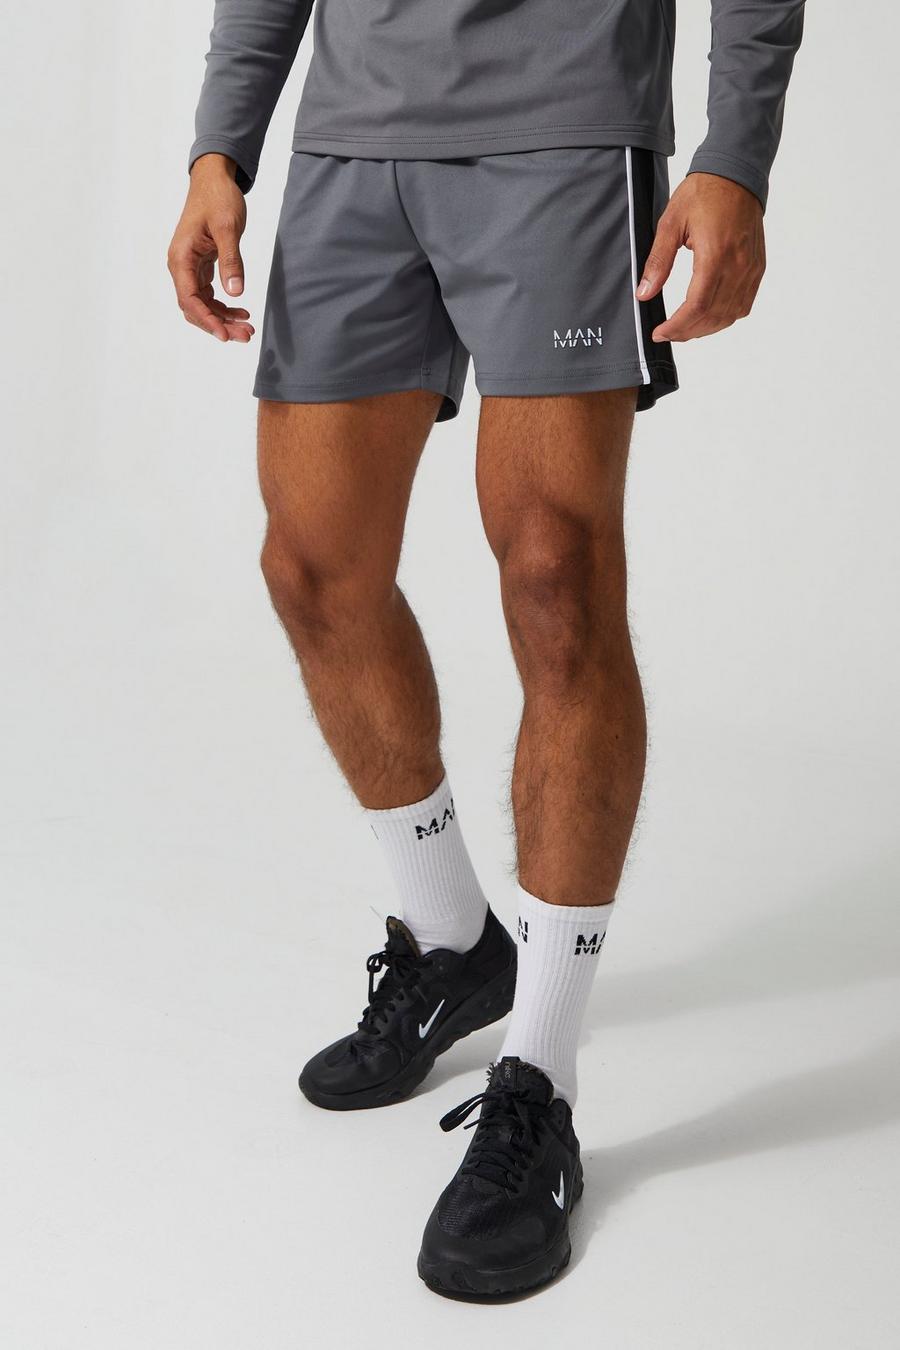 Charcoal grey Man Active Performance Voetbal Shorts